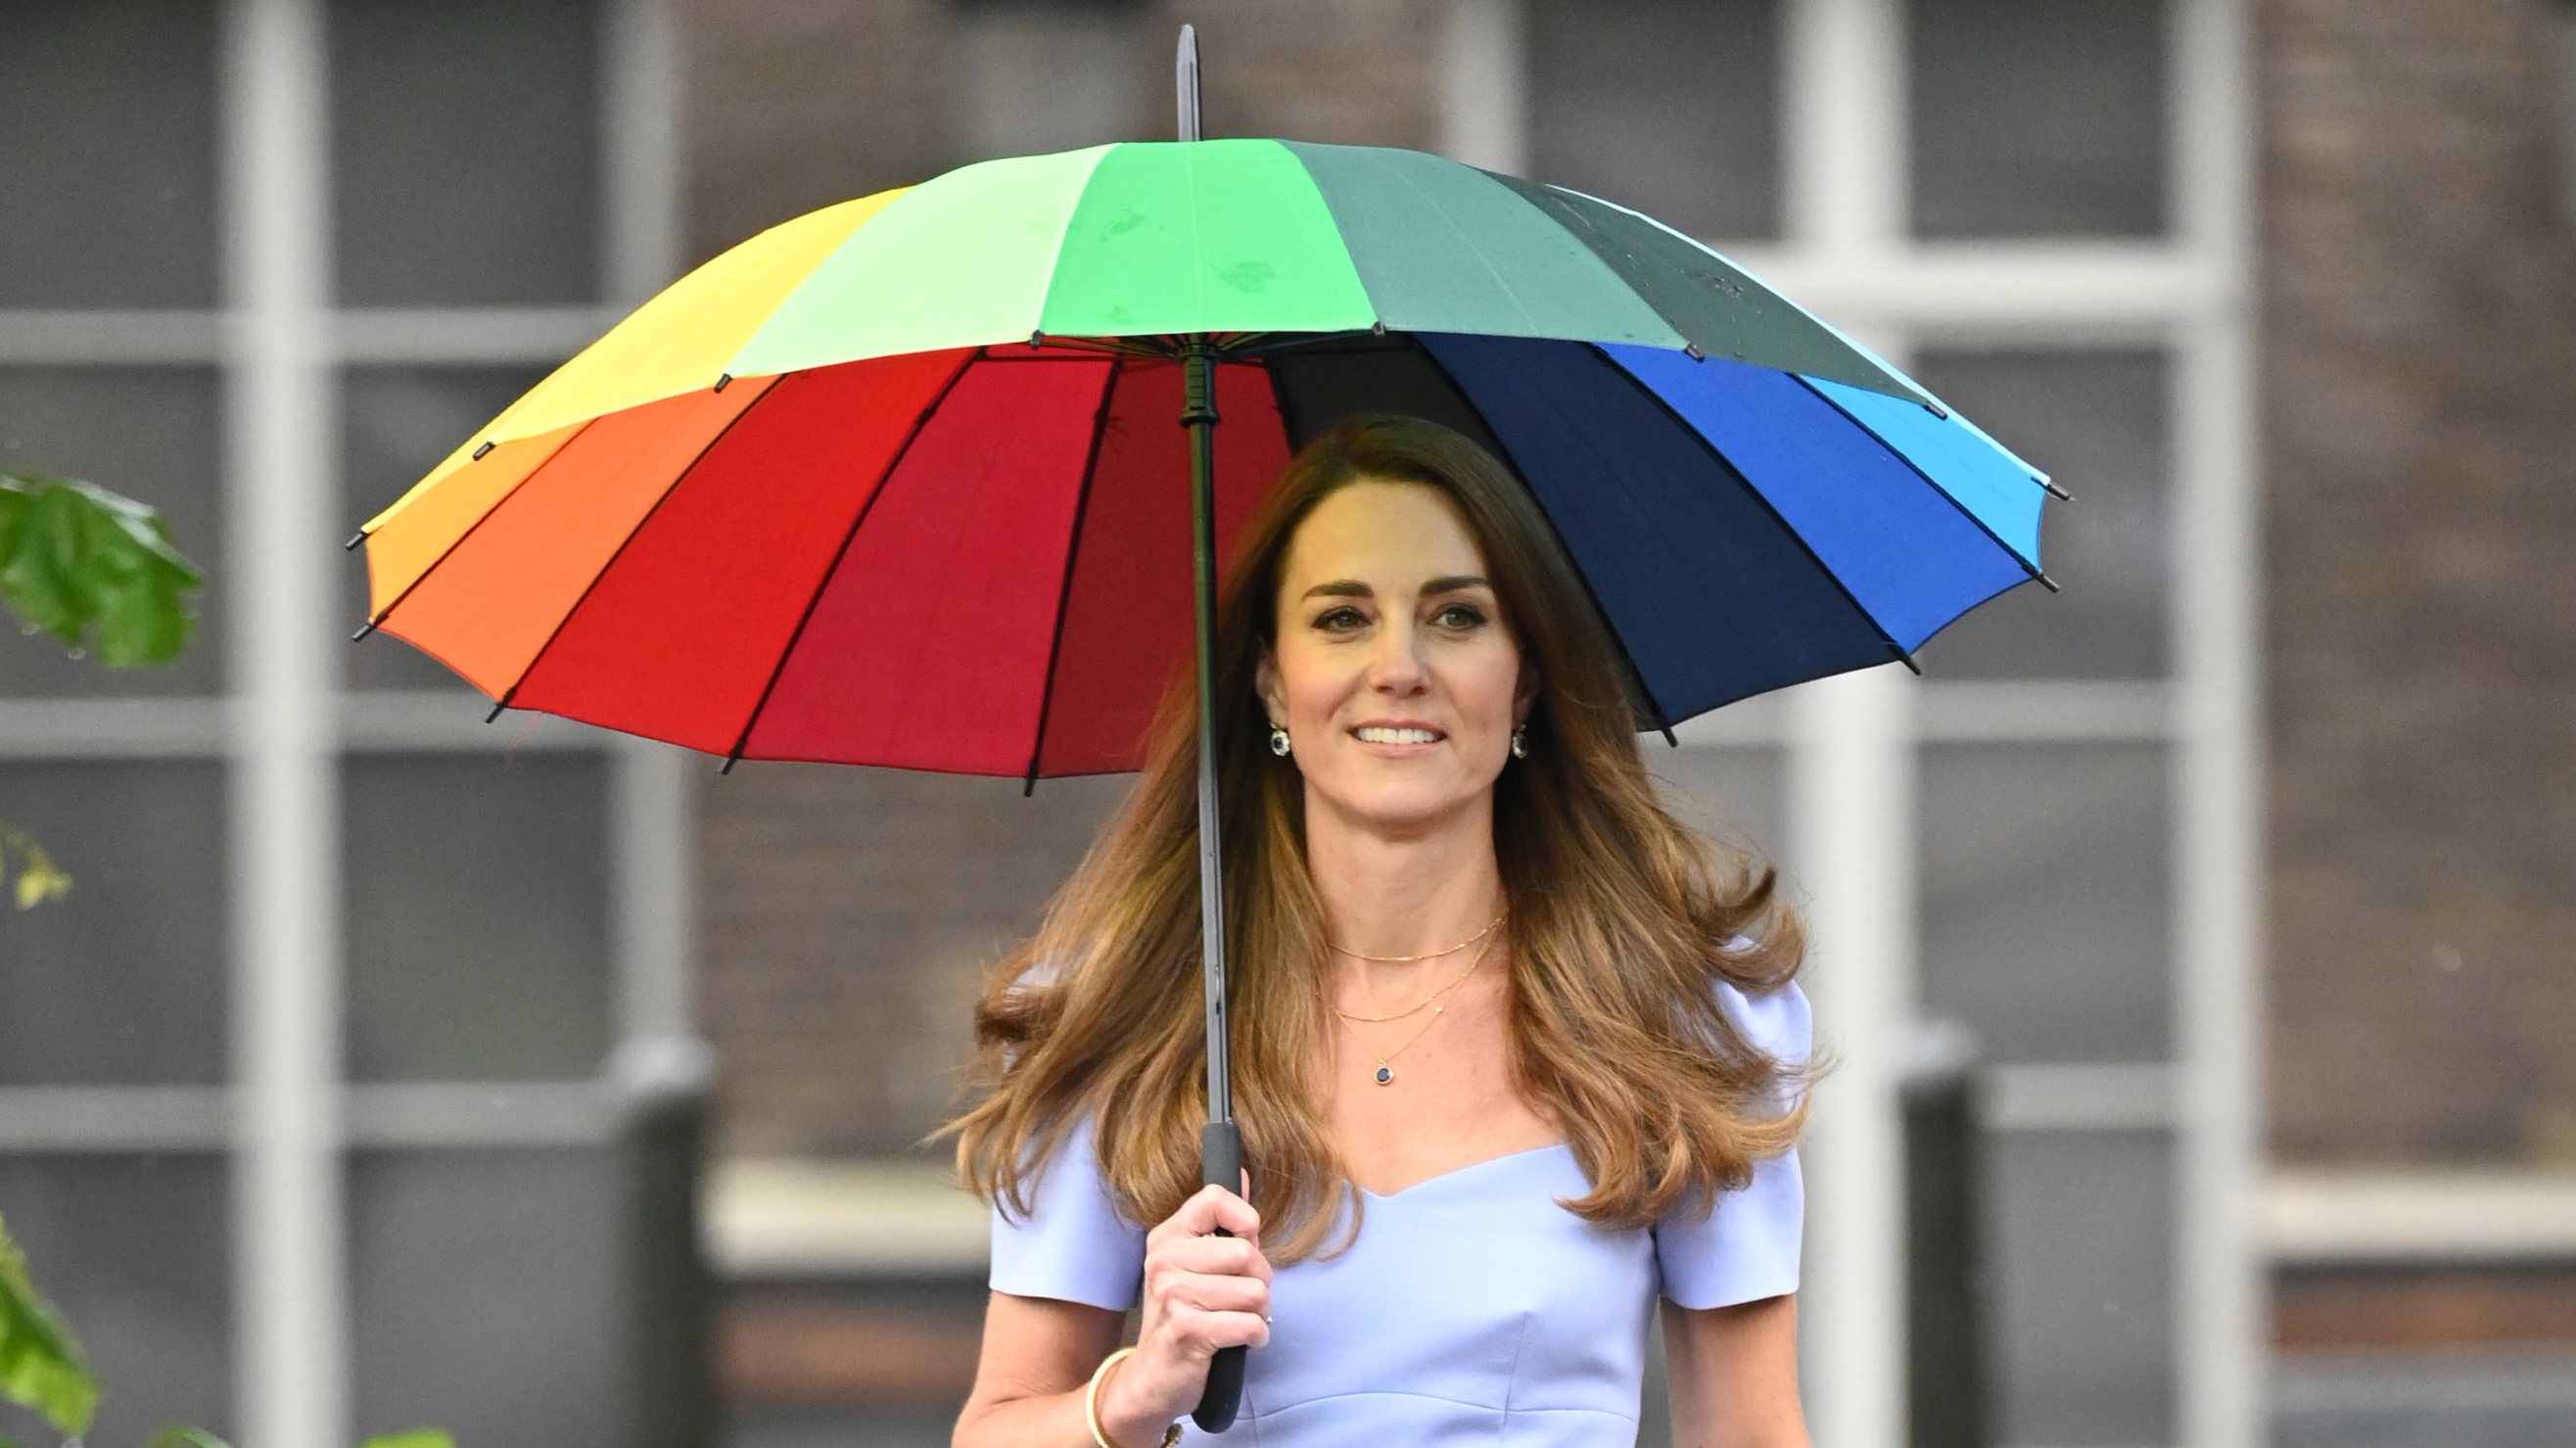 The Duchess Of Cambridge Launches The Royal Foundation Centre For Early Childhood